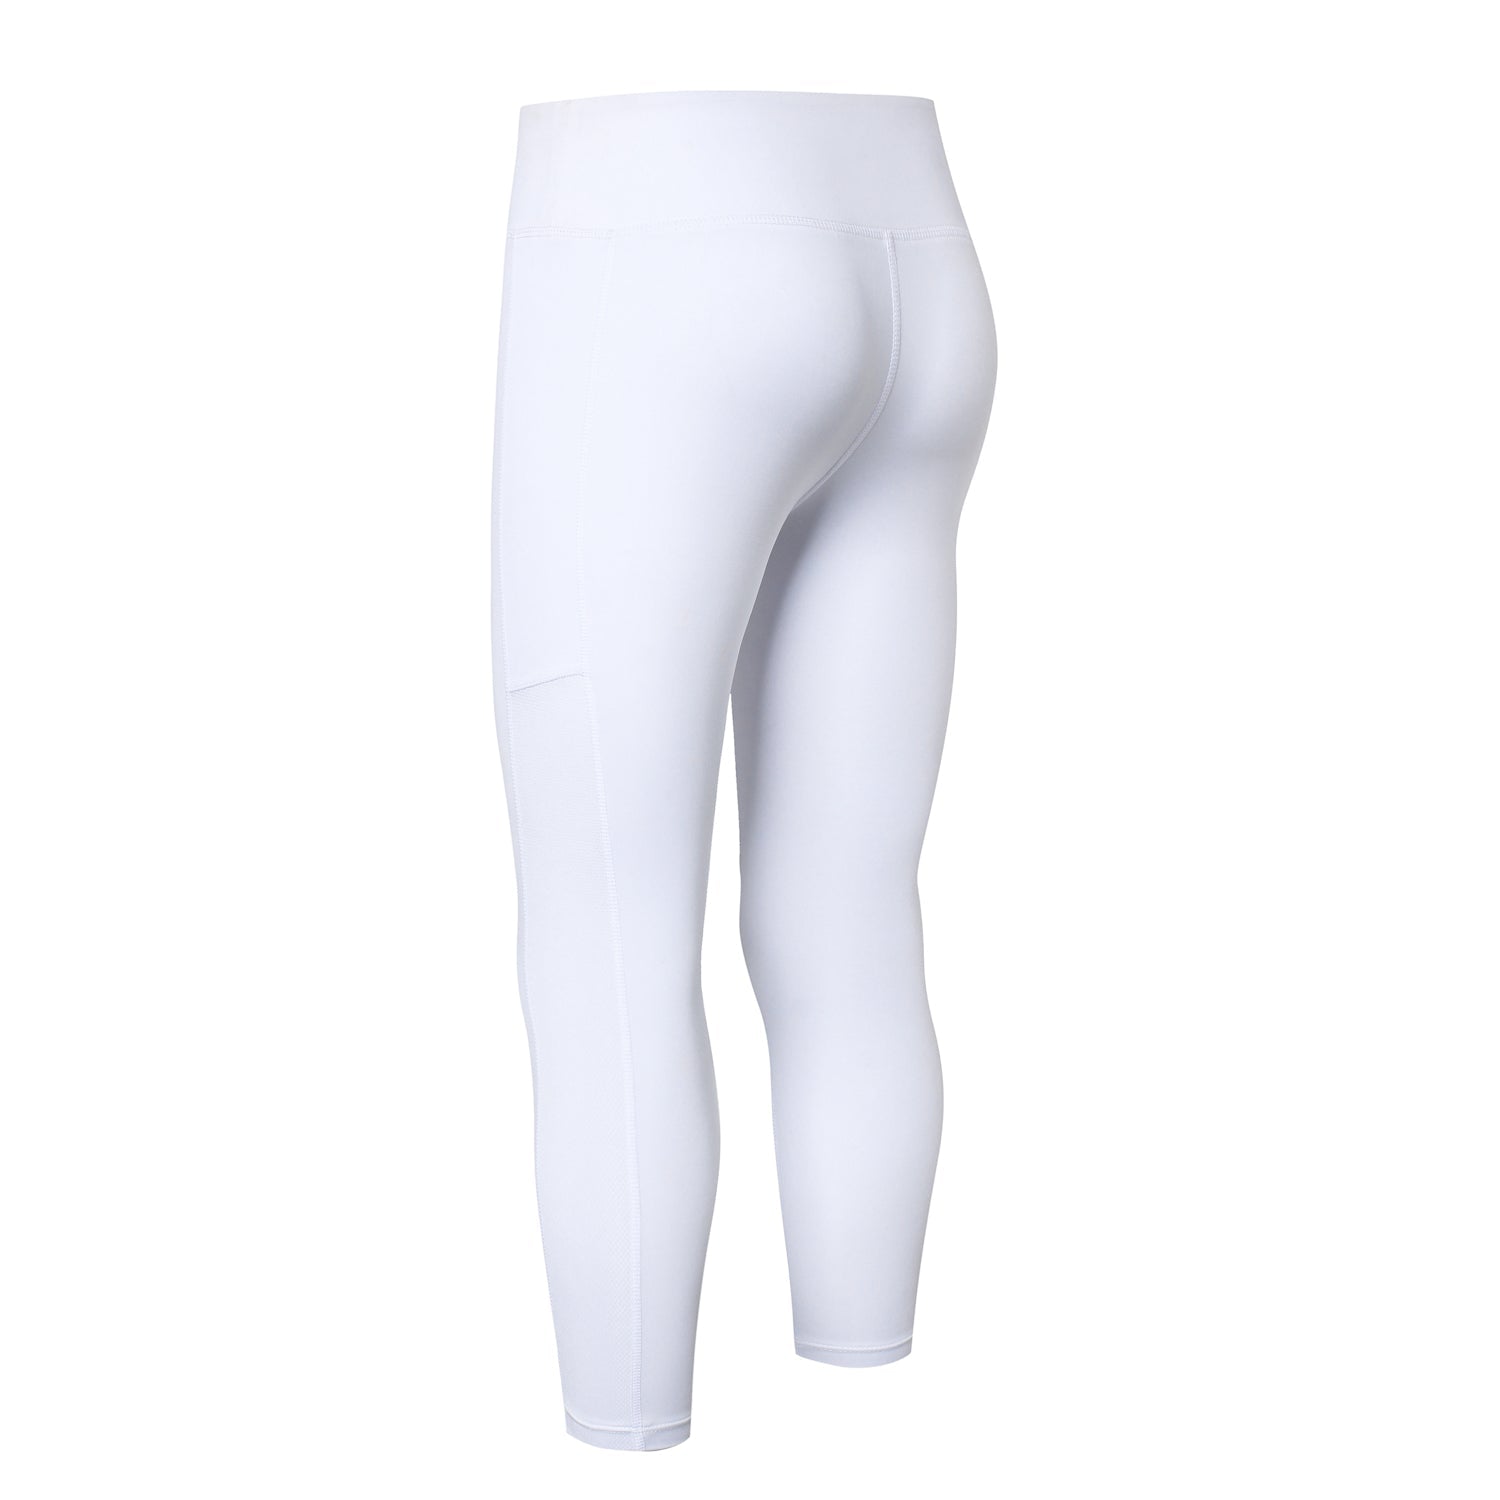 Women Tight Quick-drying Yoga Cropped Pants 3/4 Leggings with Pockets 2087